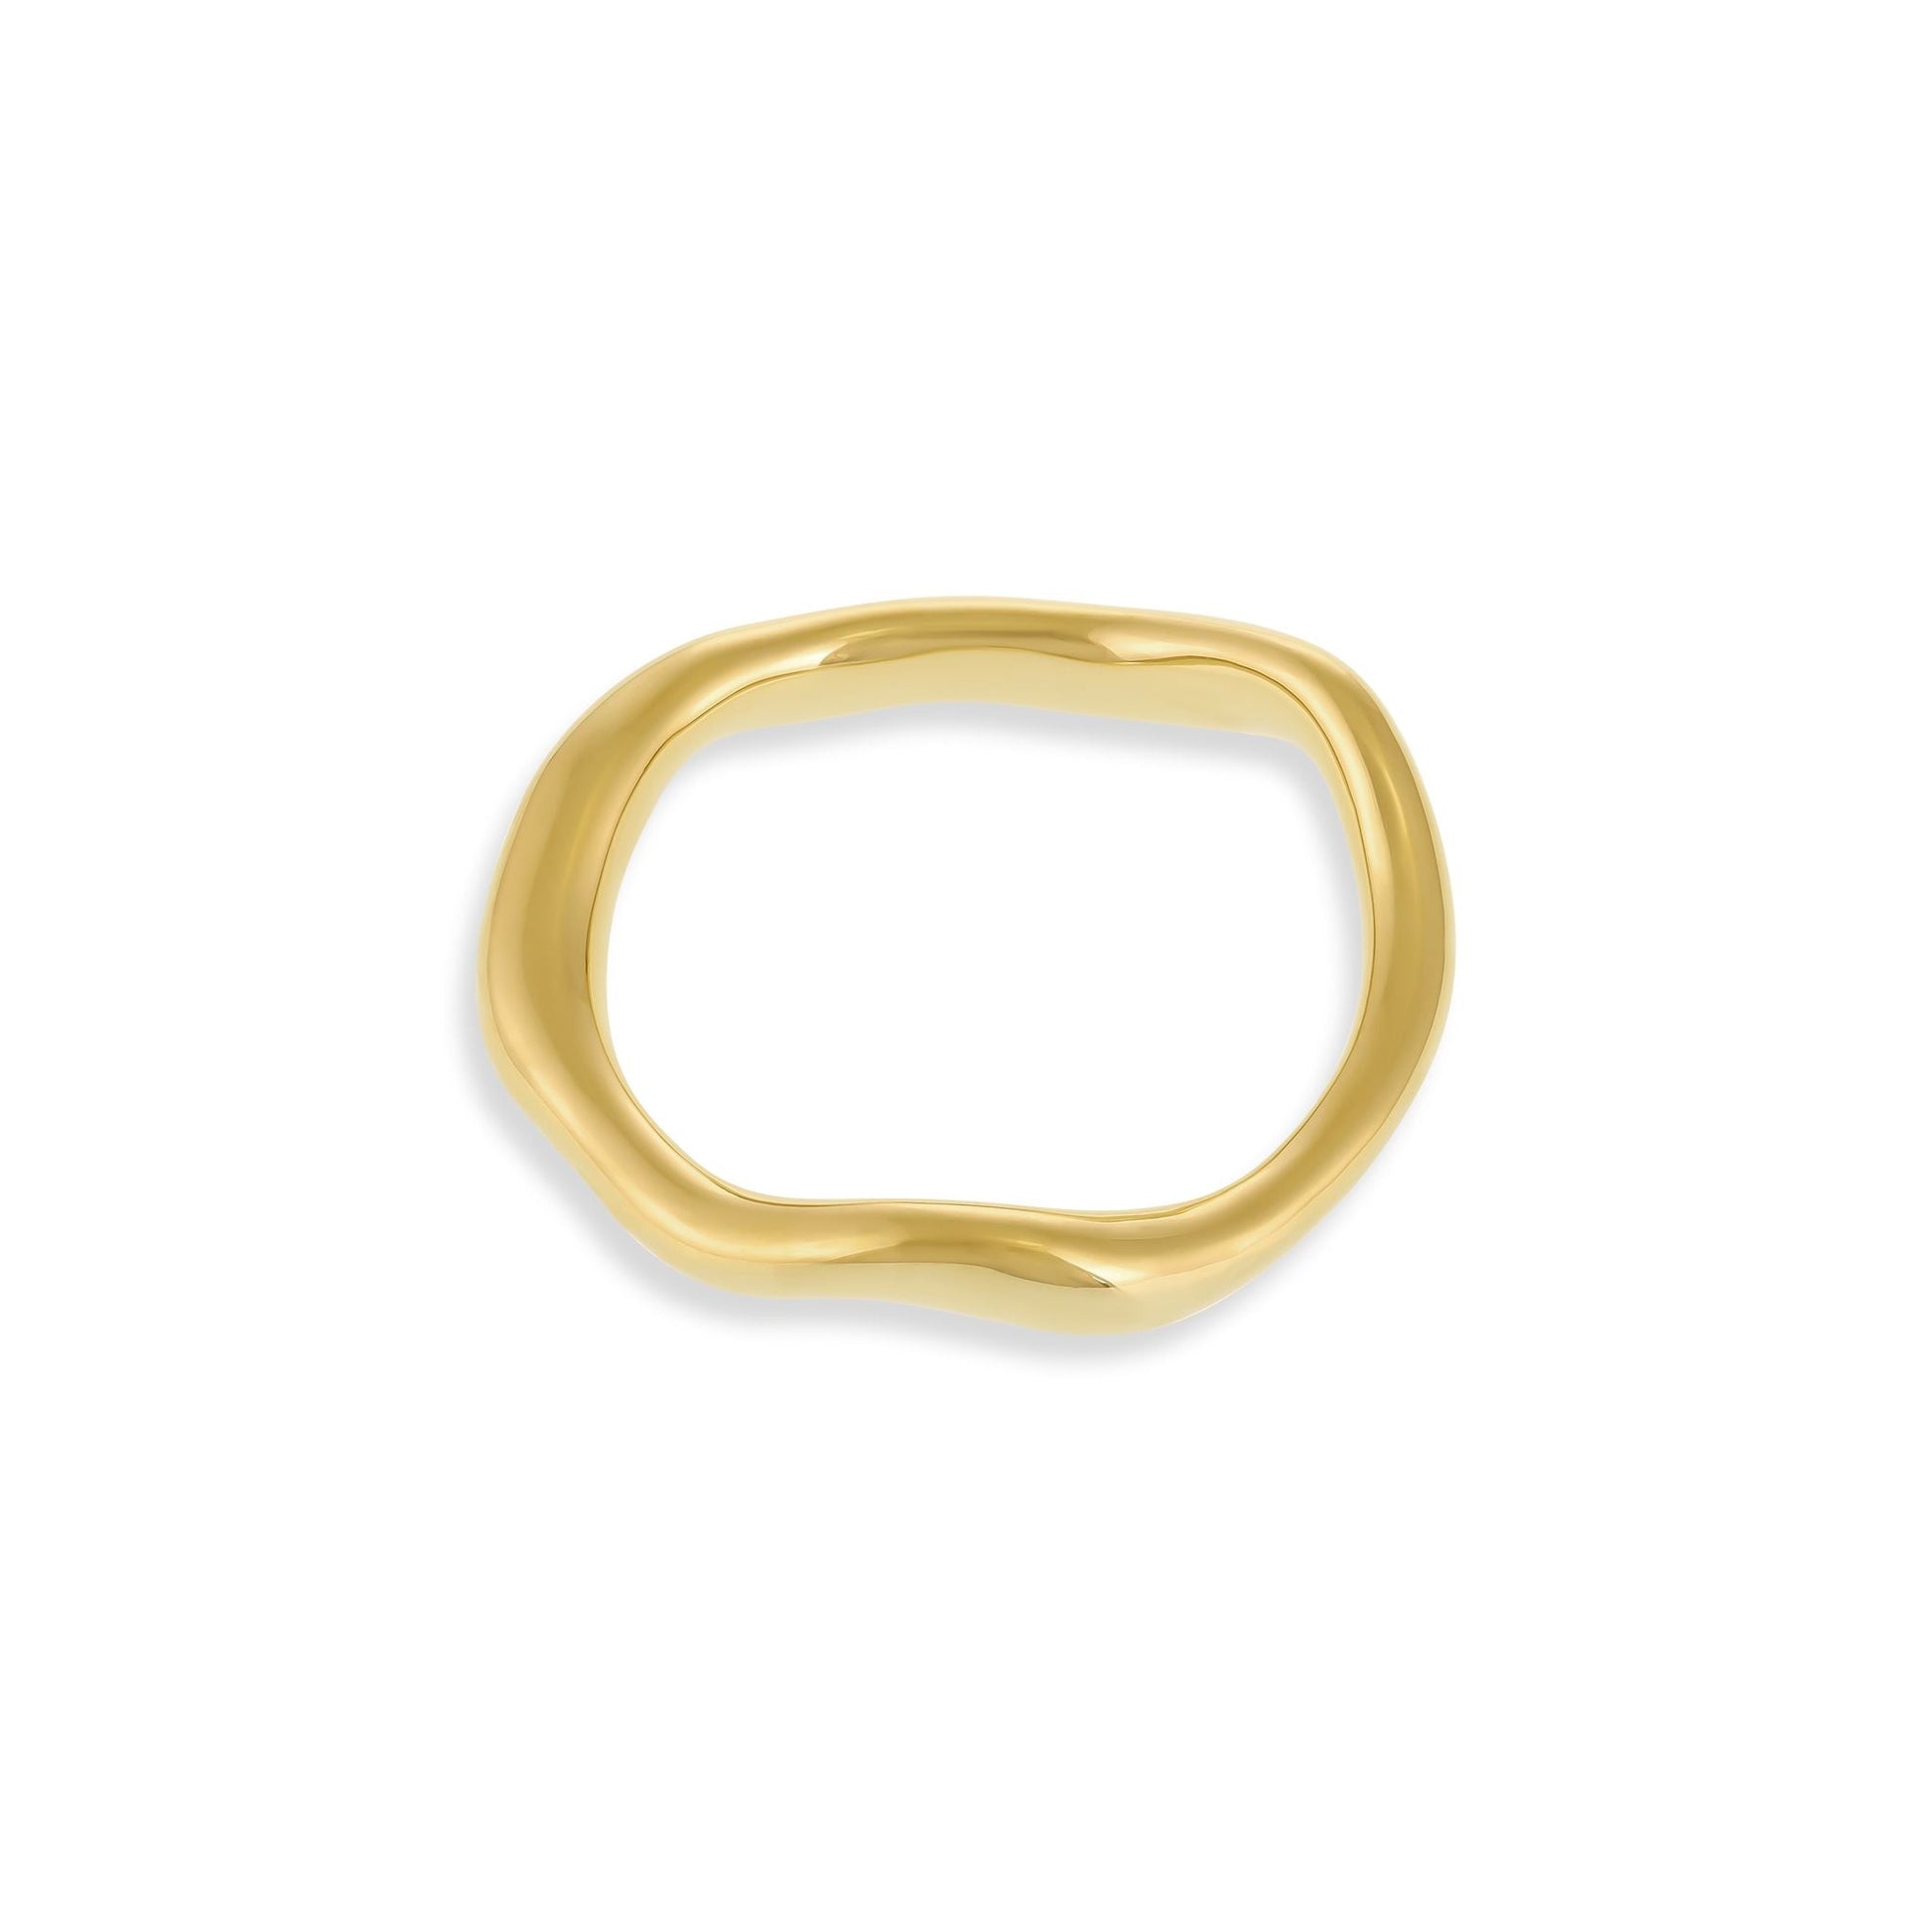 18ct 1 micron gold plated silver wavy ring PRN3007 - FJewellery